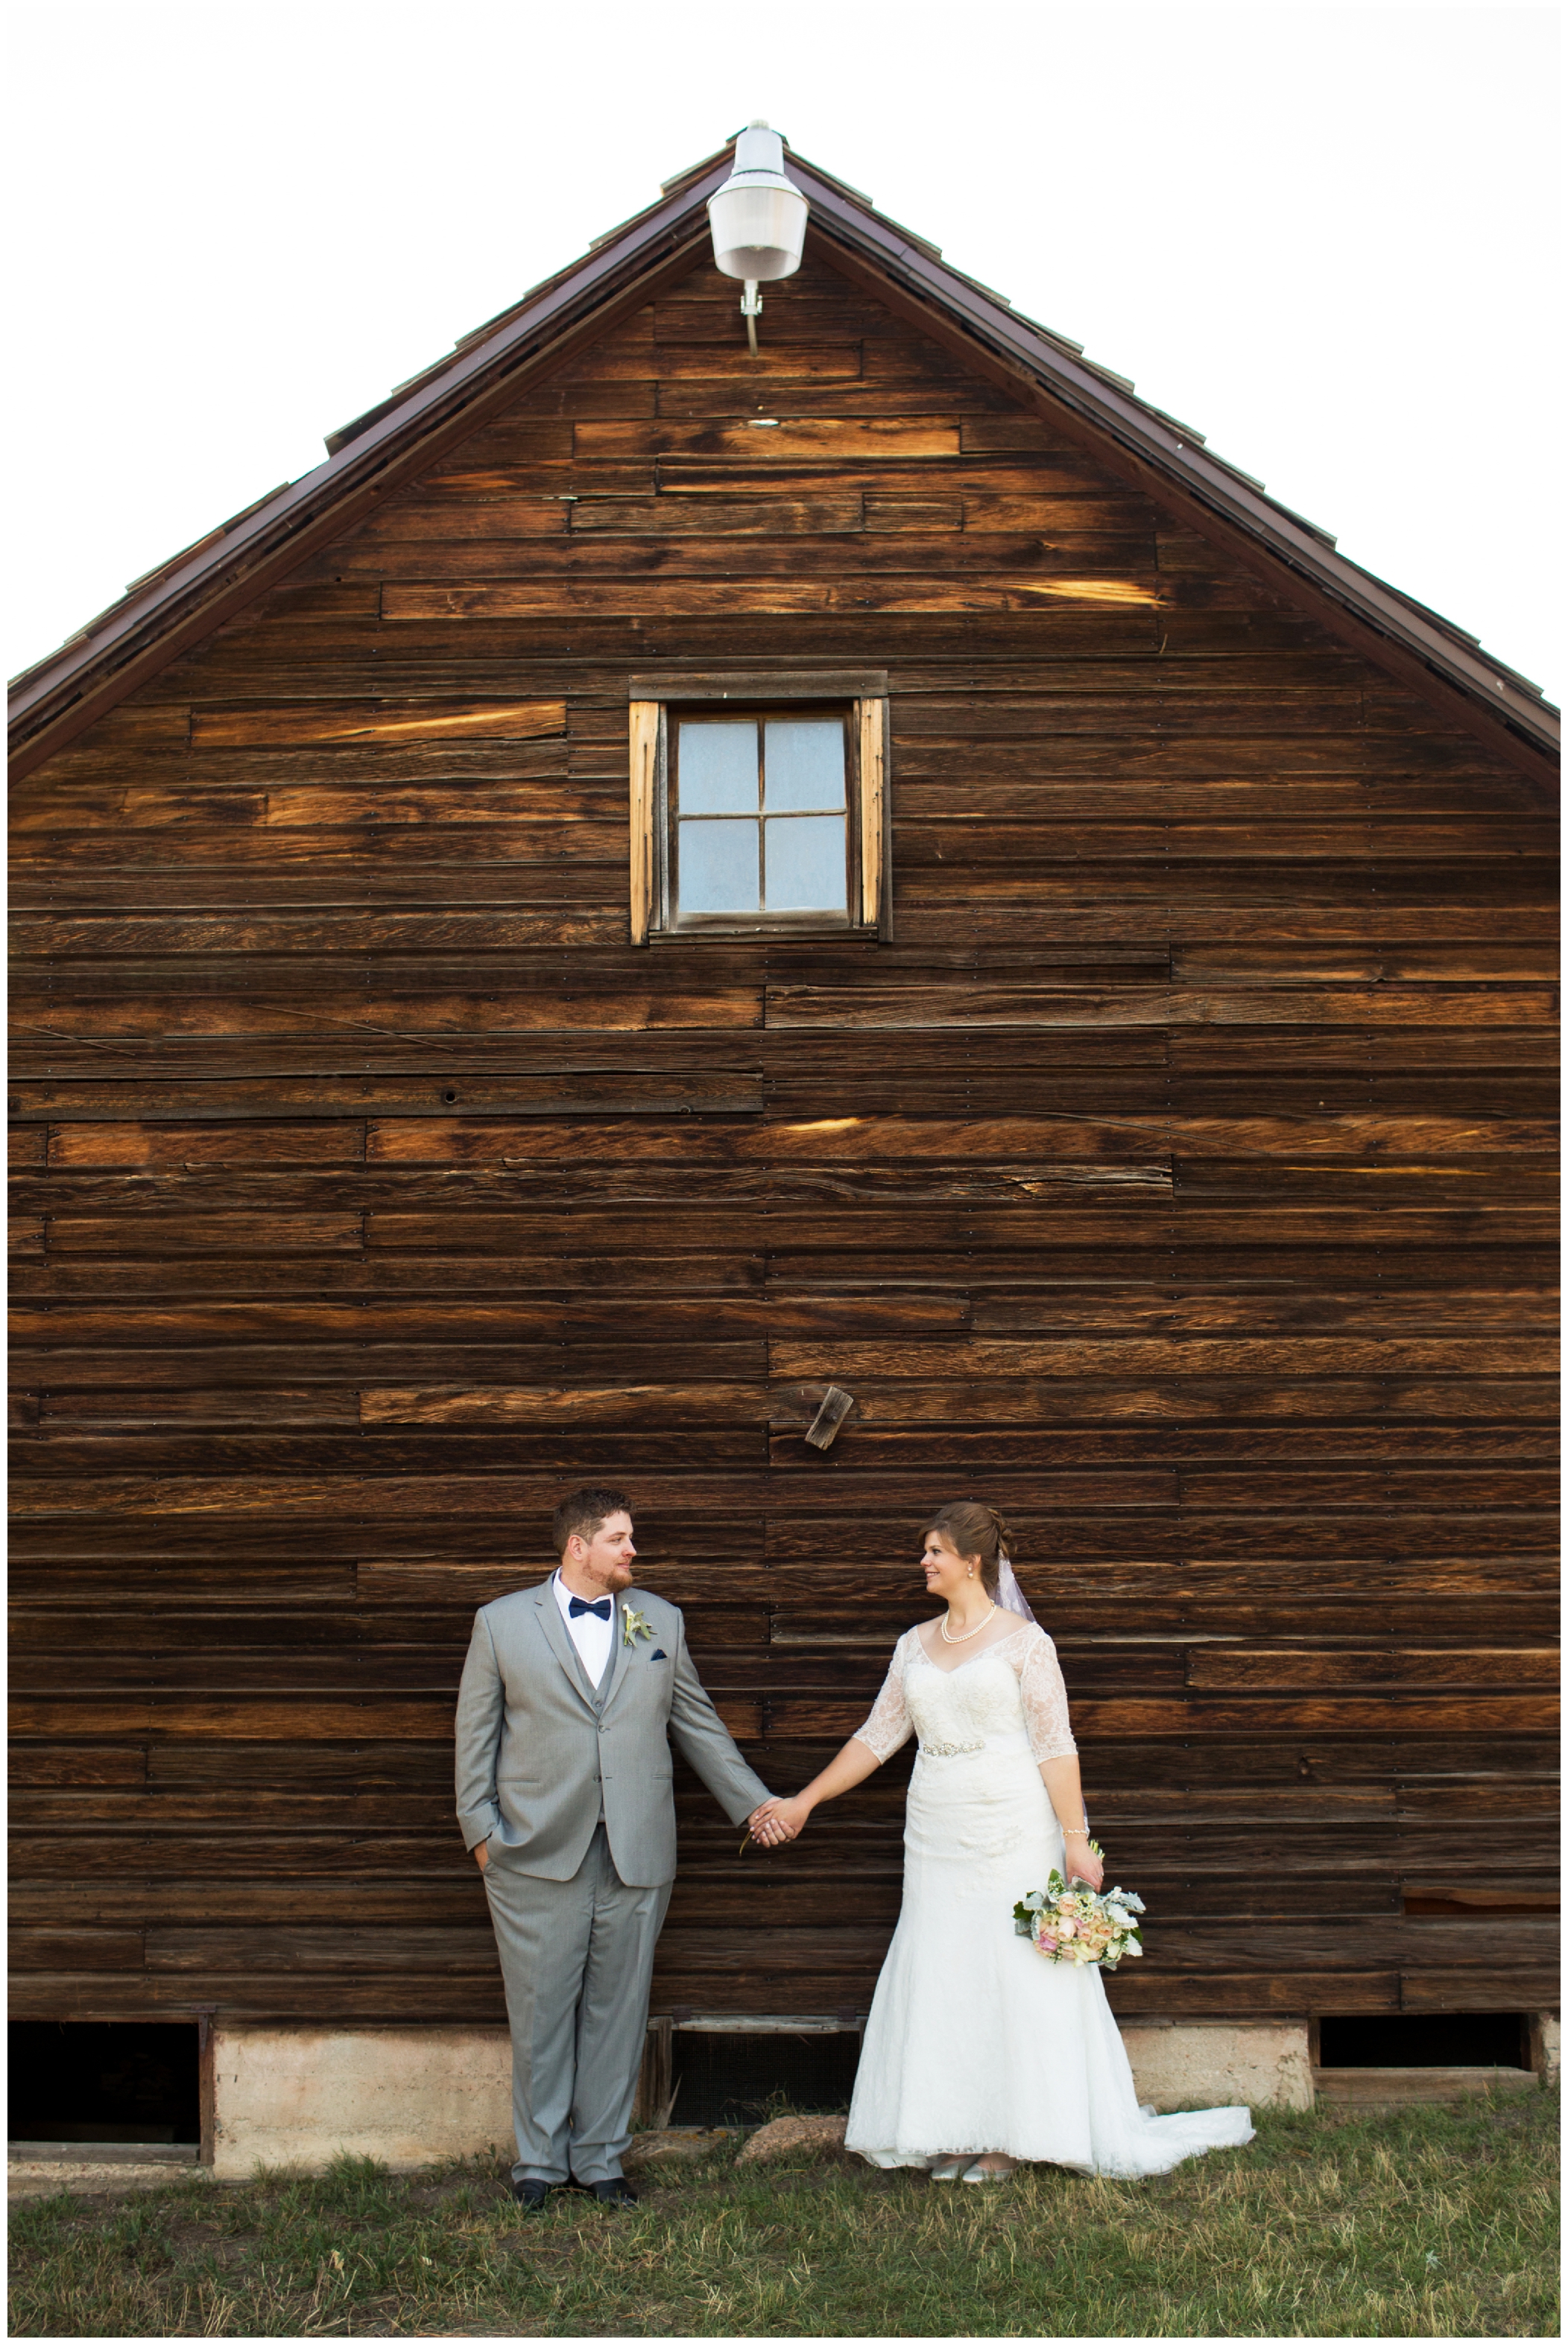 Spruce Mountain Ranch wedding in Larkspur, CO by Colorado photographer Plum Pretty Photography